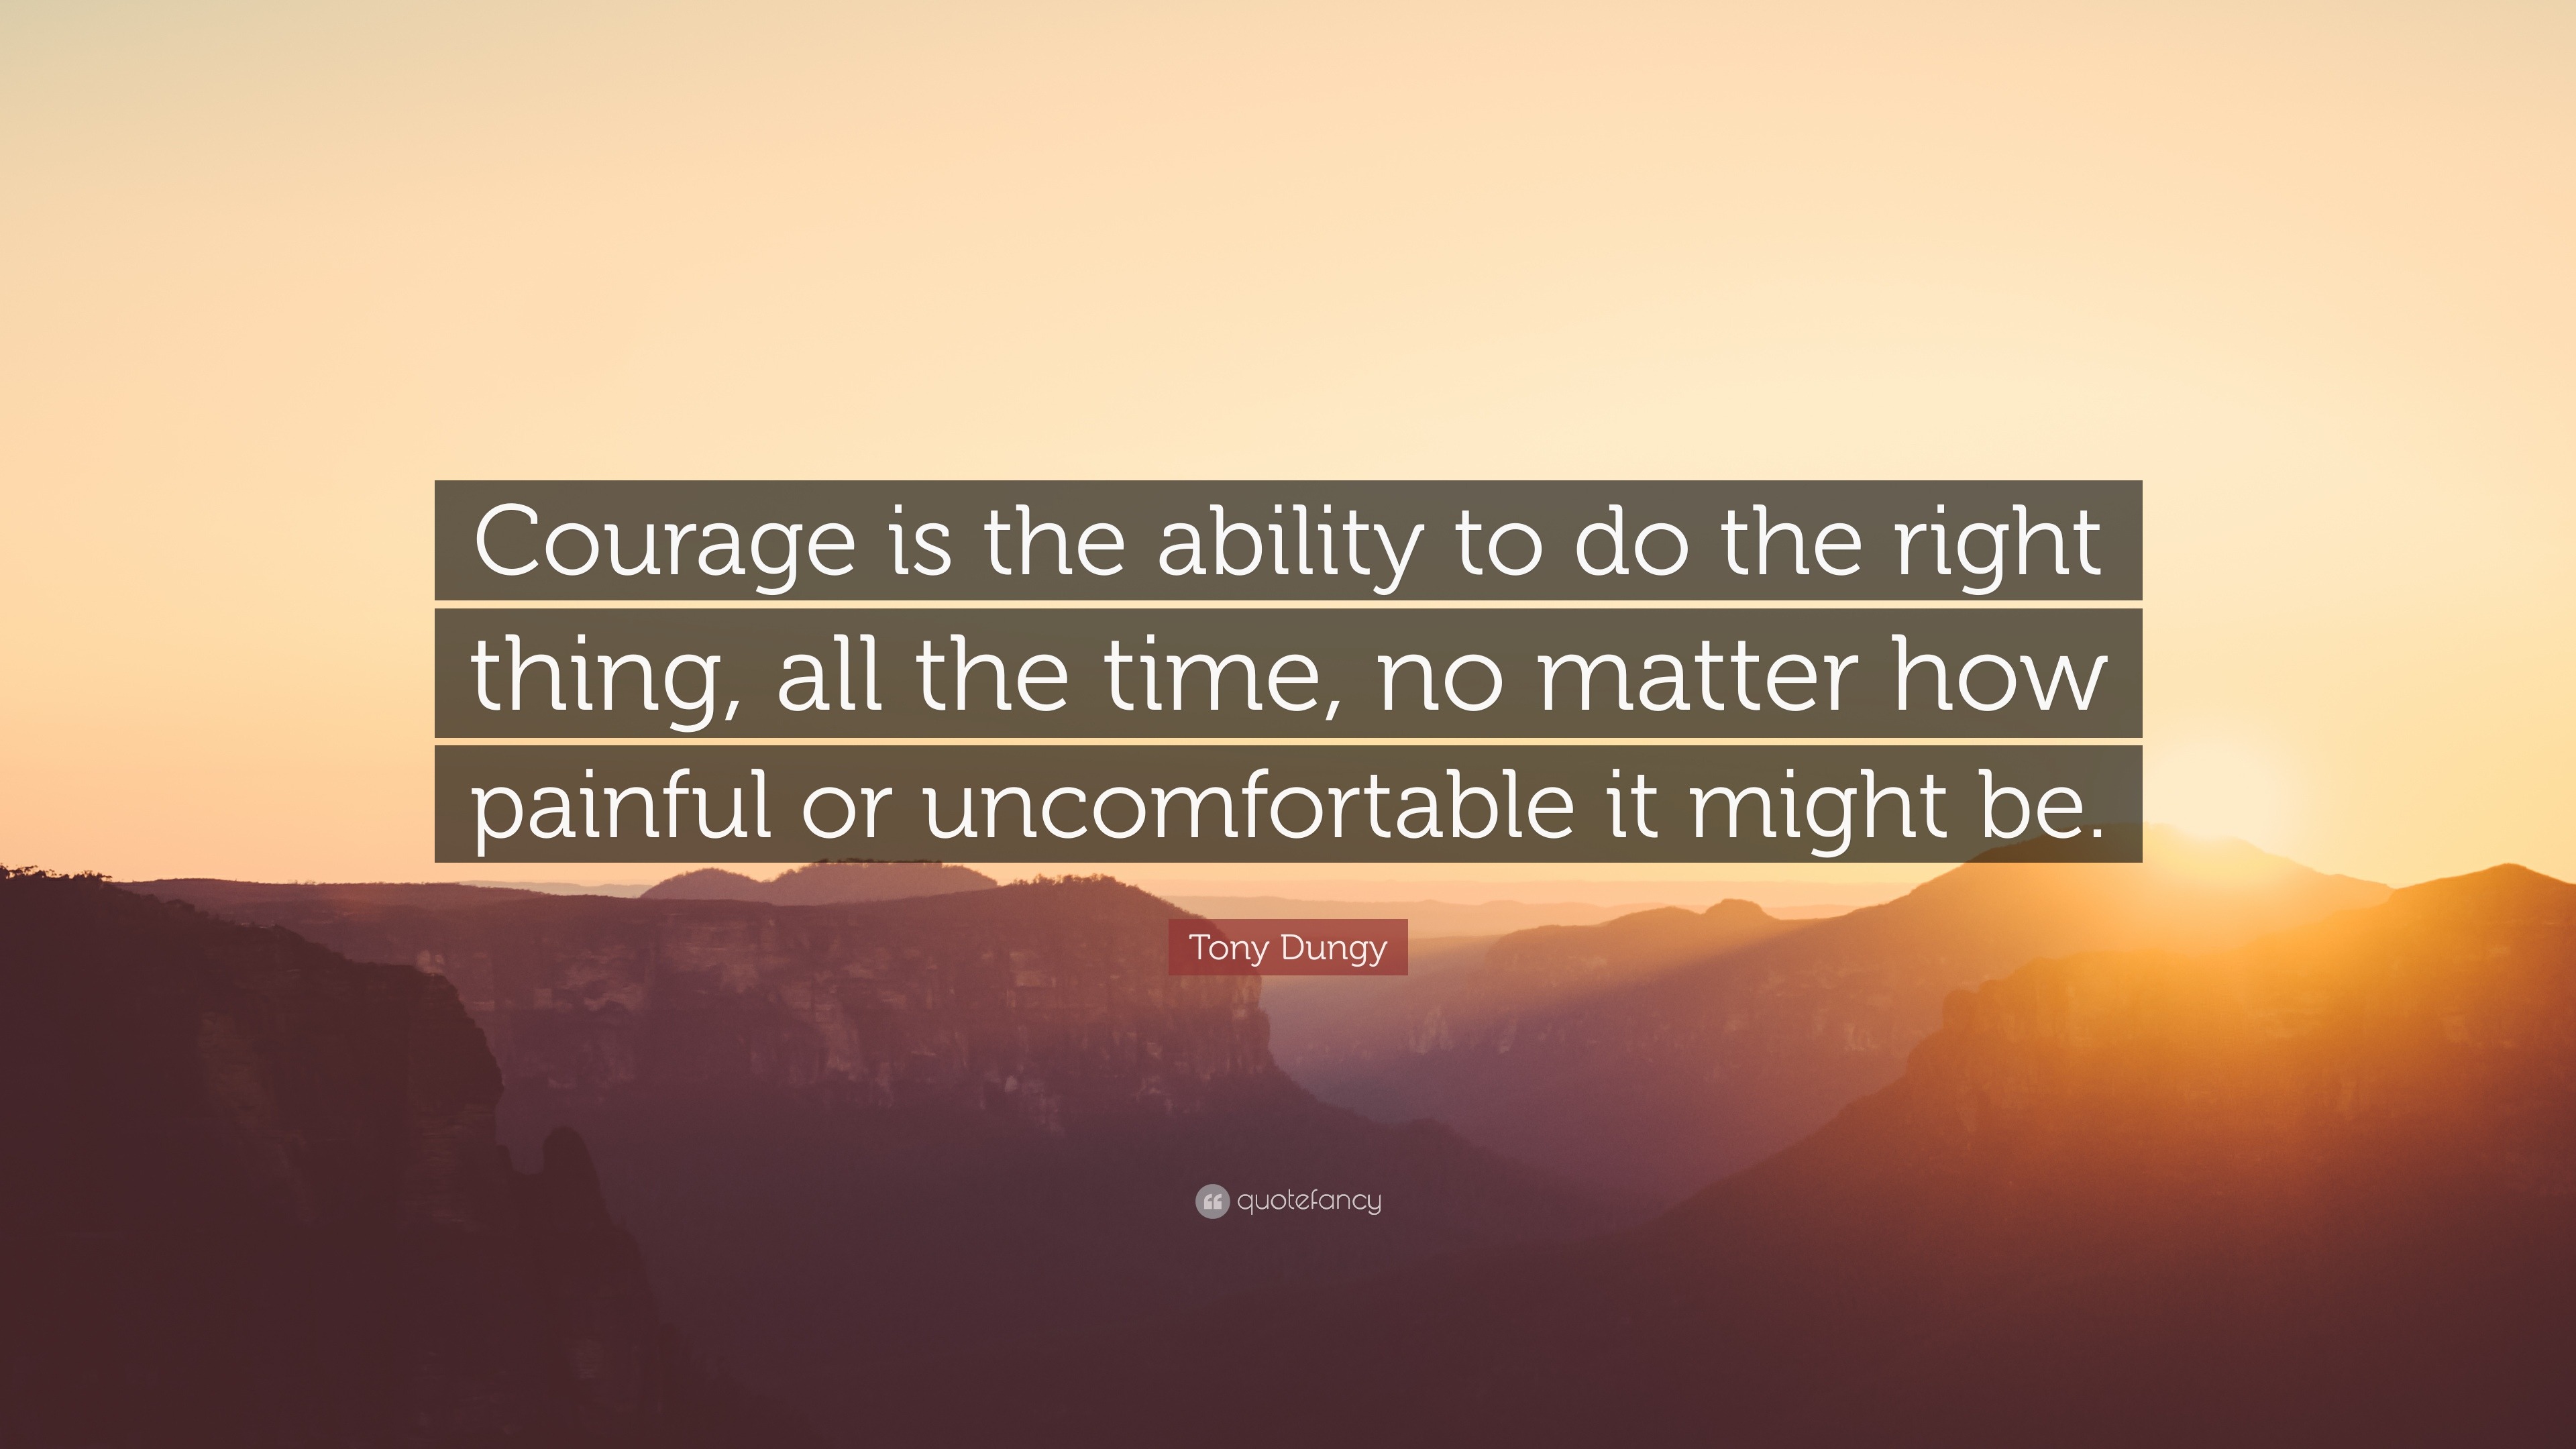 Tony Dungy Quote: “Courage is the ability to do the right thing, all ...